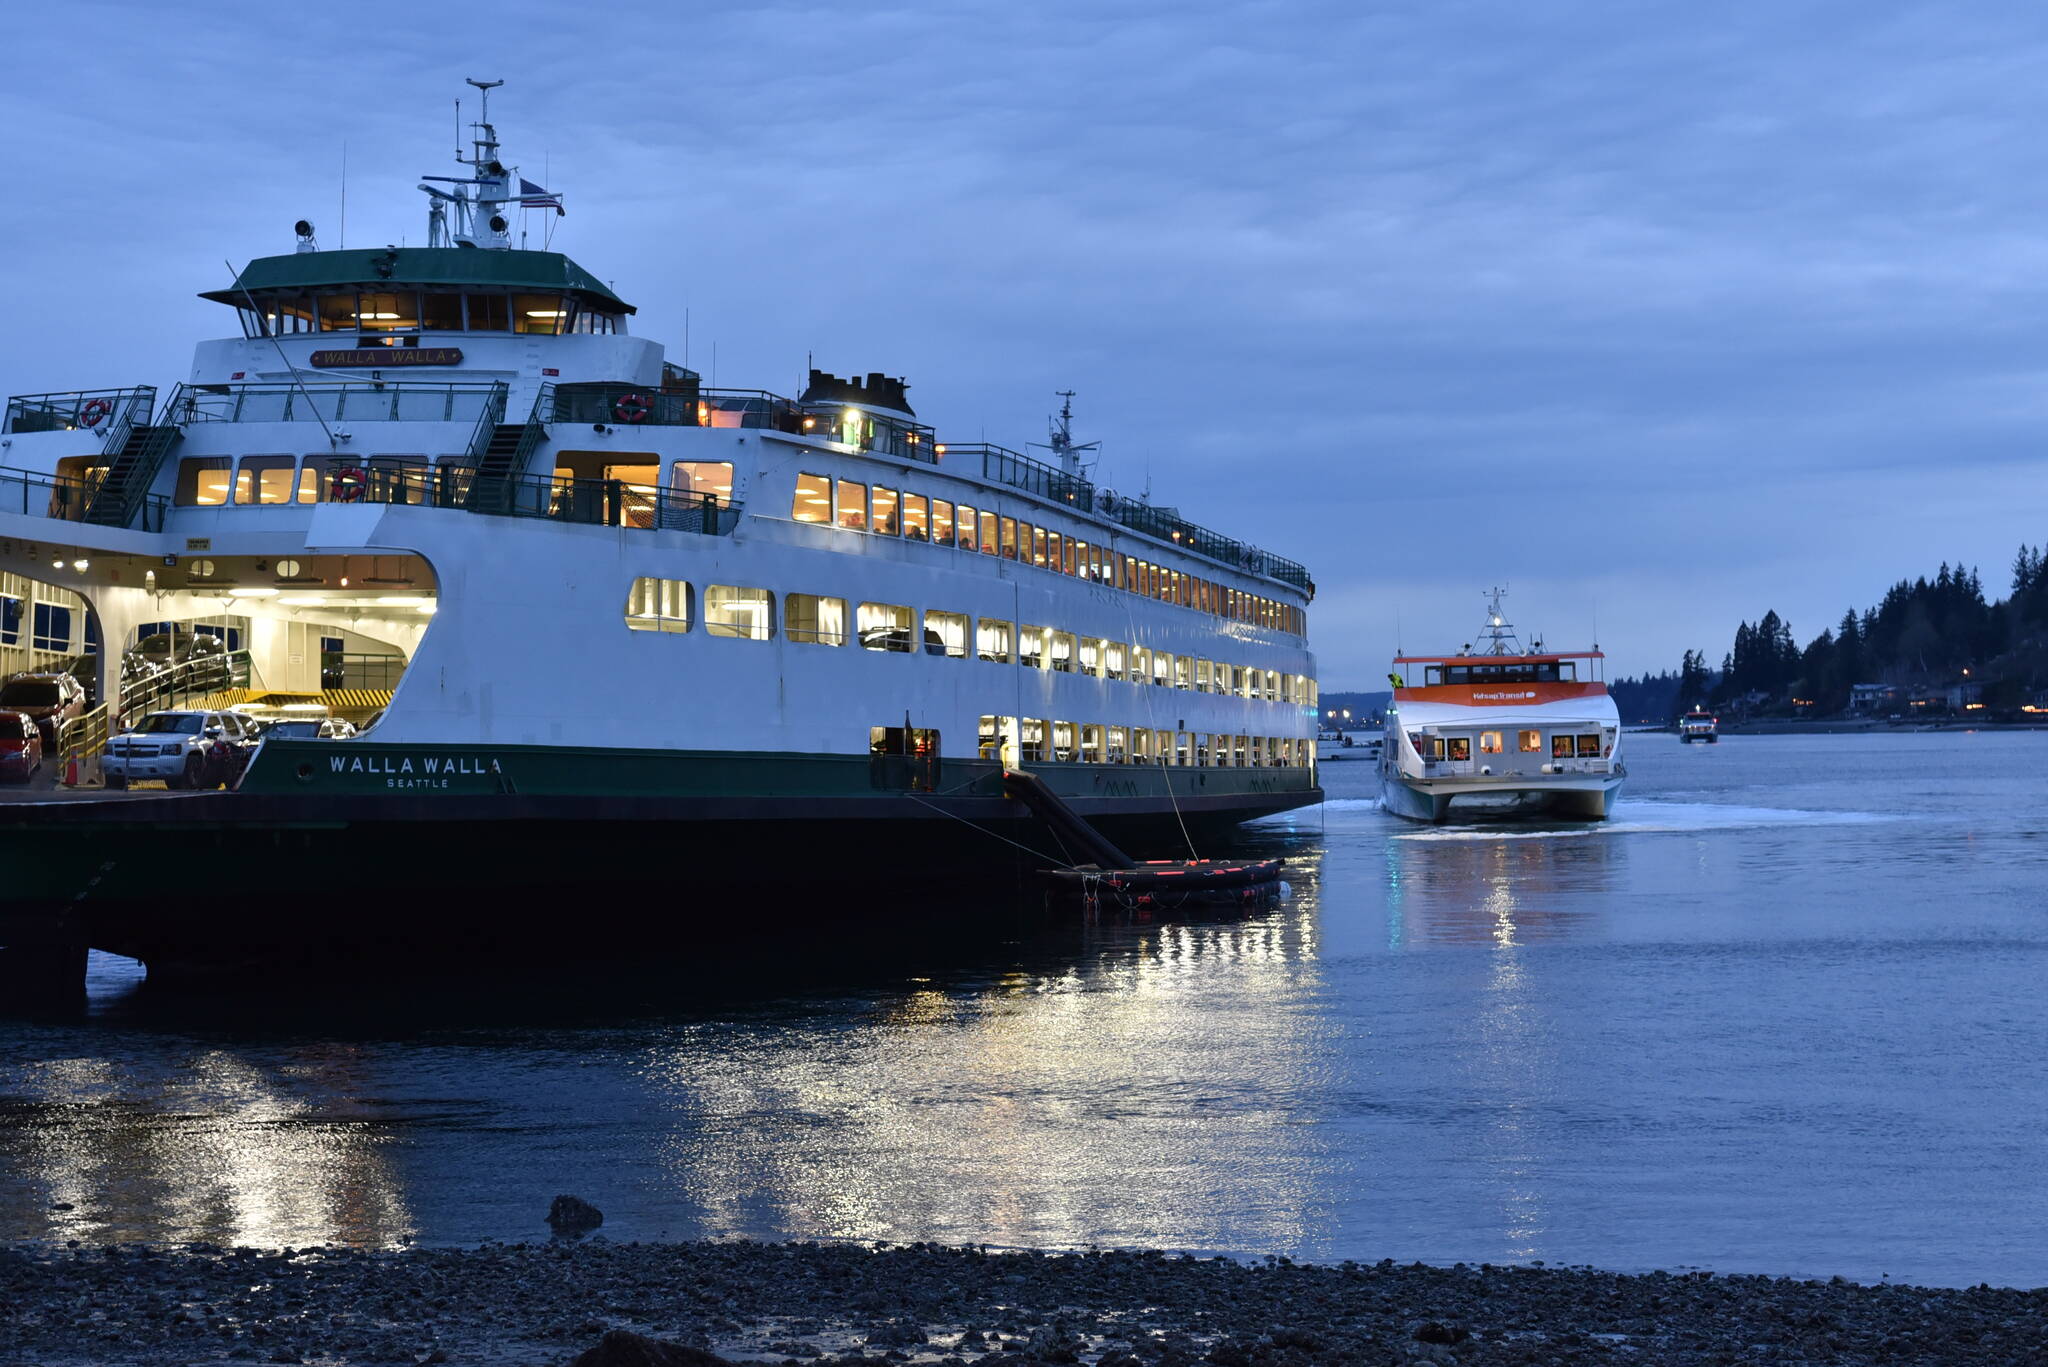 The first group of 243 passengers departs the Walla Walla on a foot ferry bound for Bremerton.